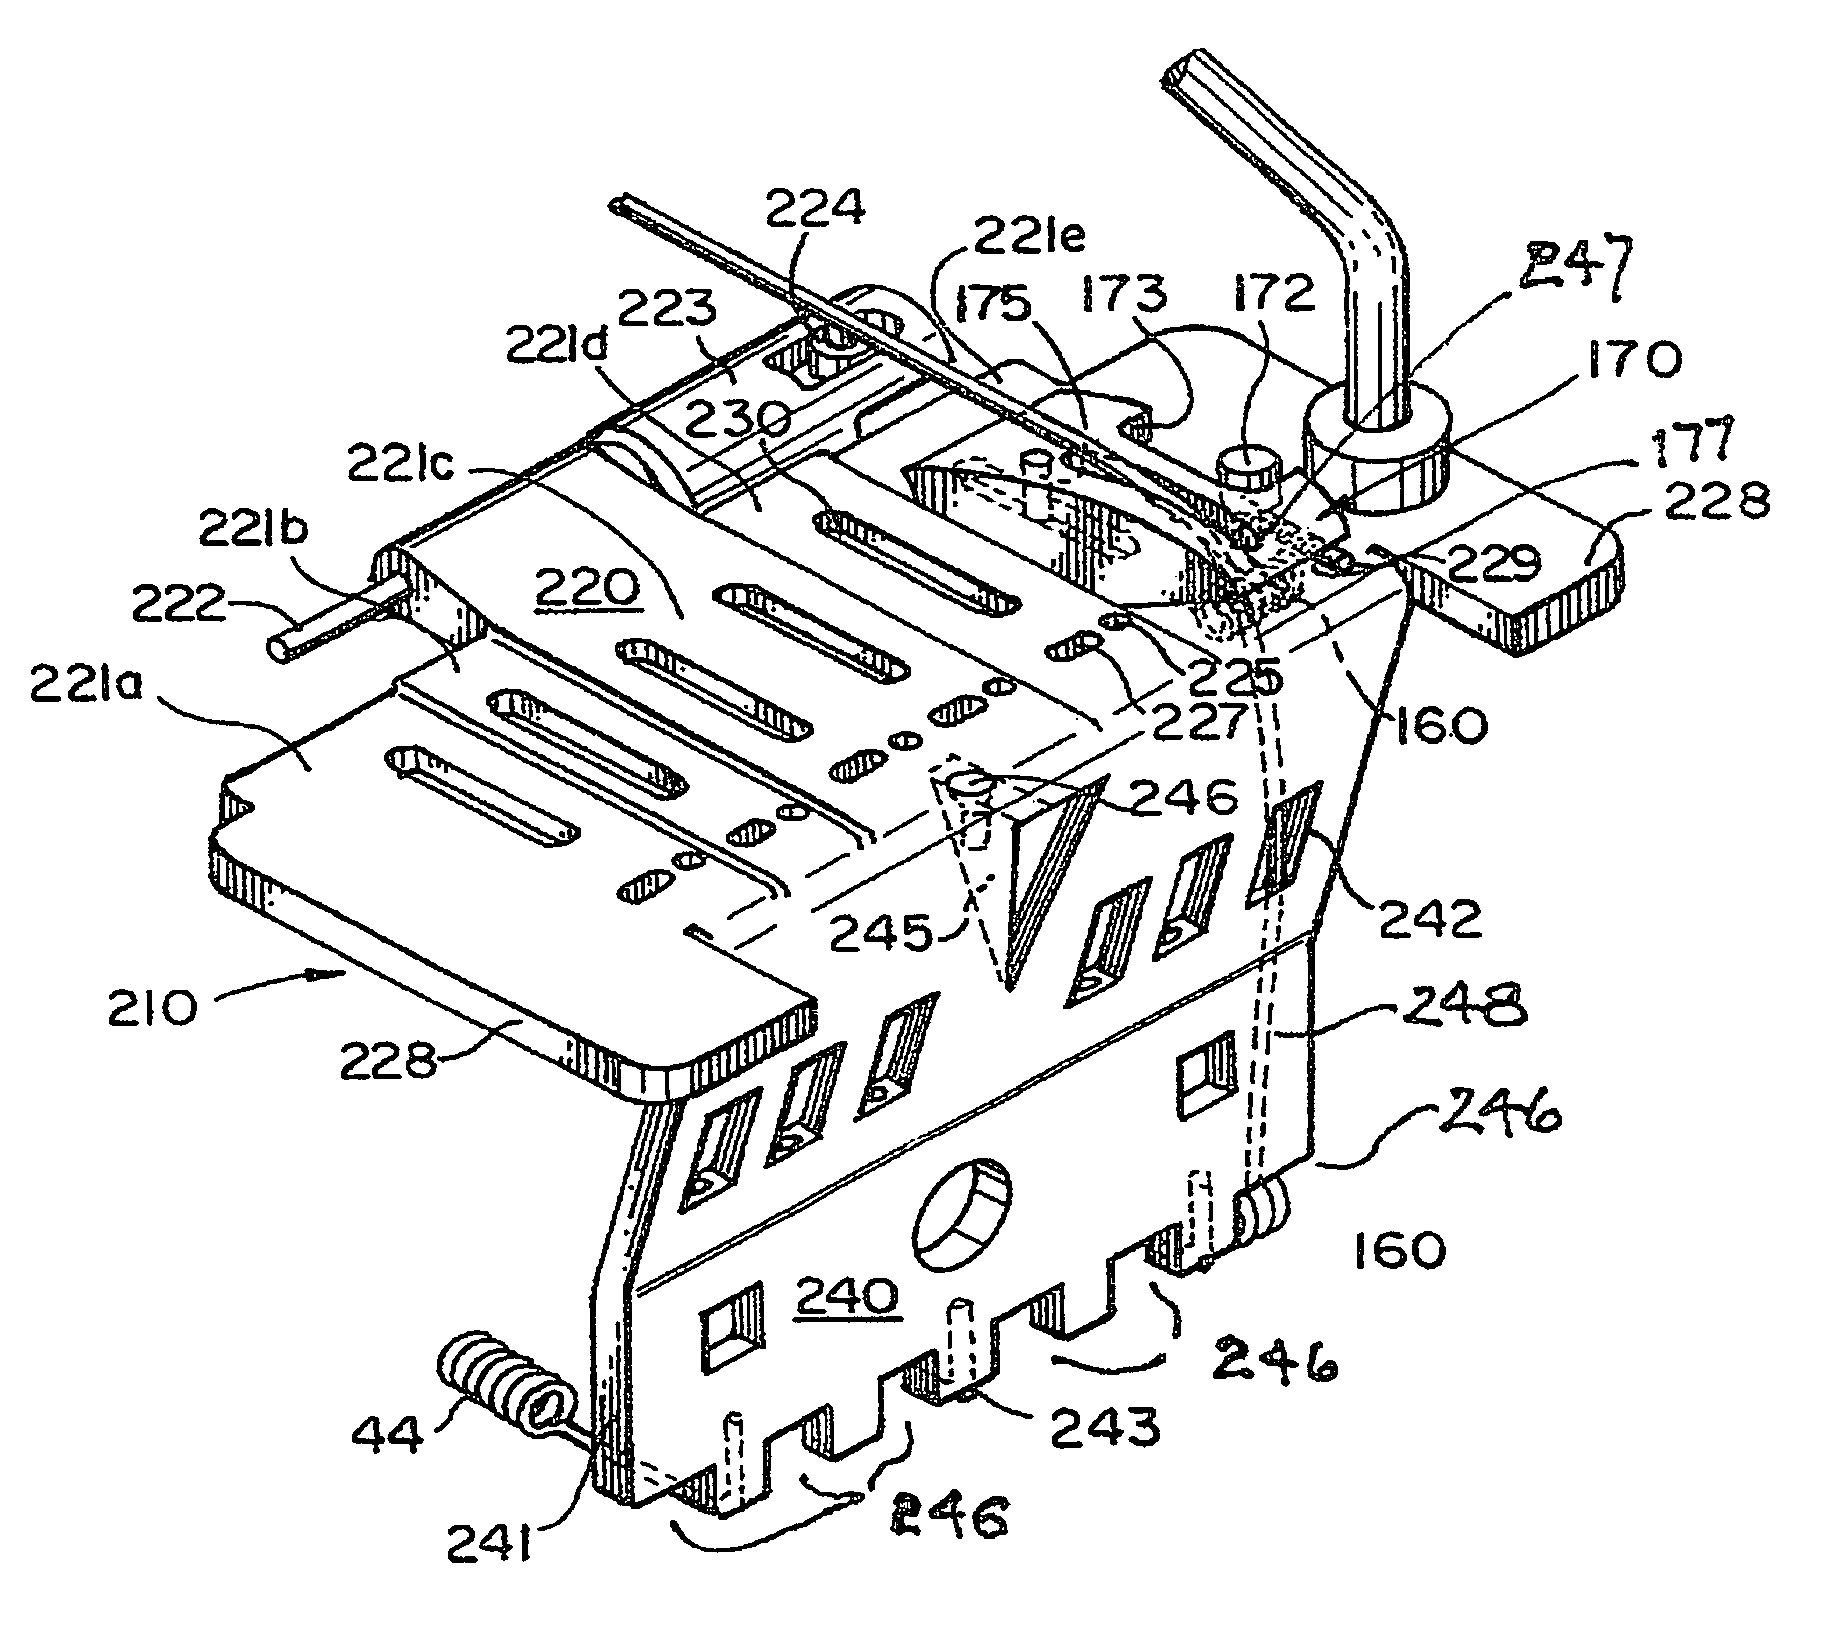 Tuning apparatus for stringed instrument